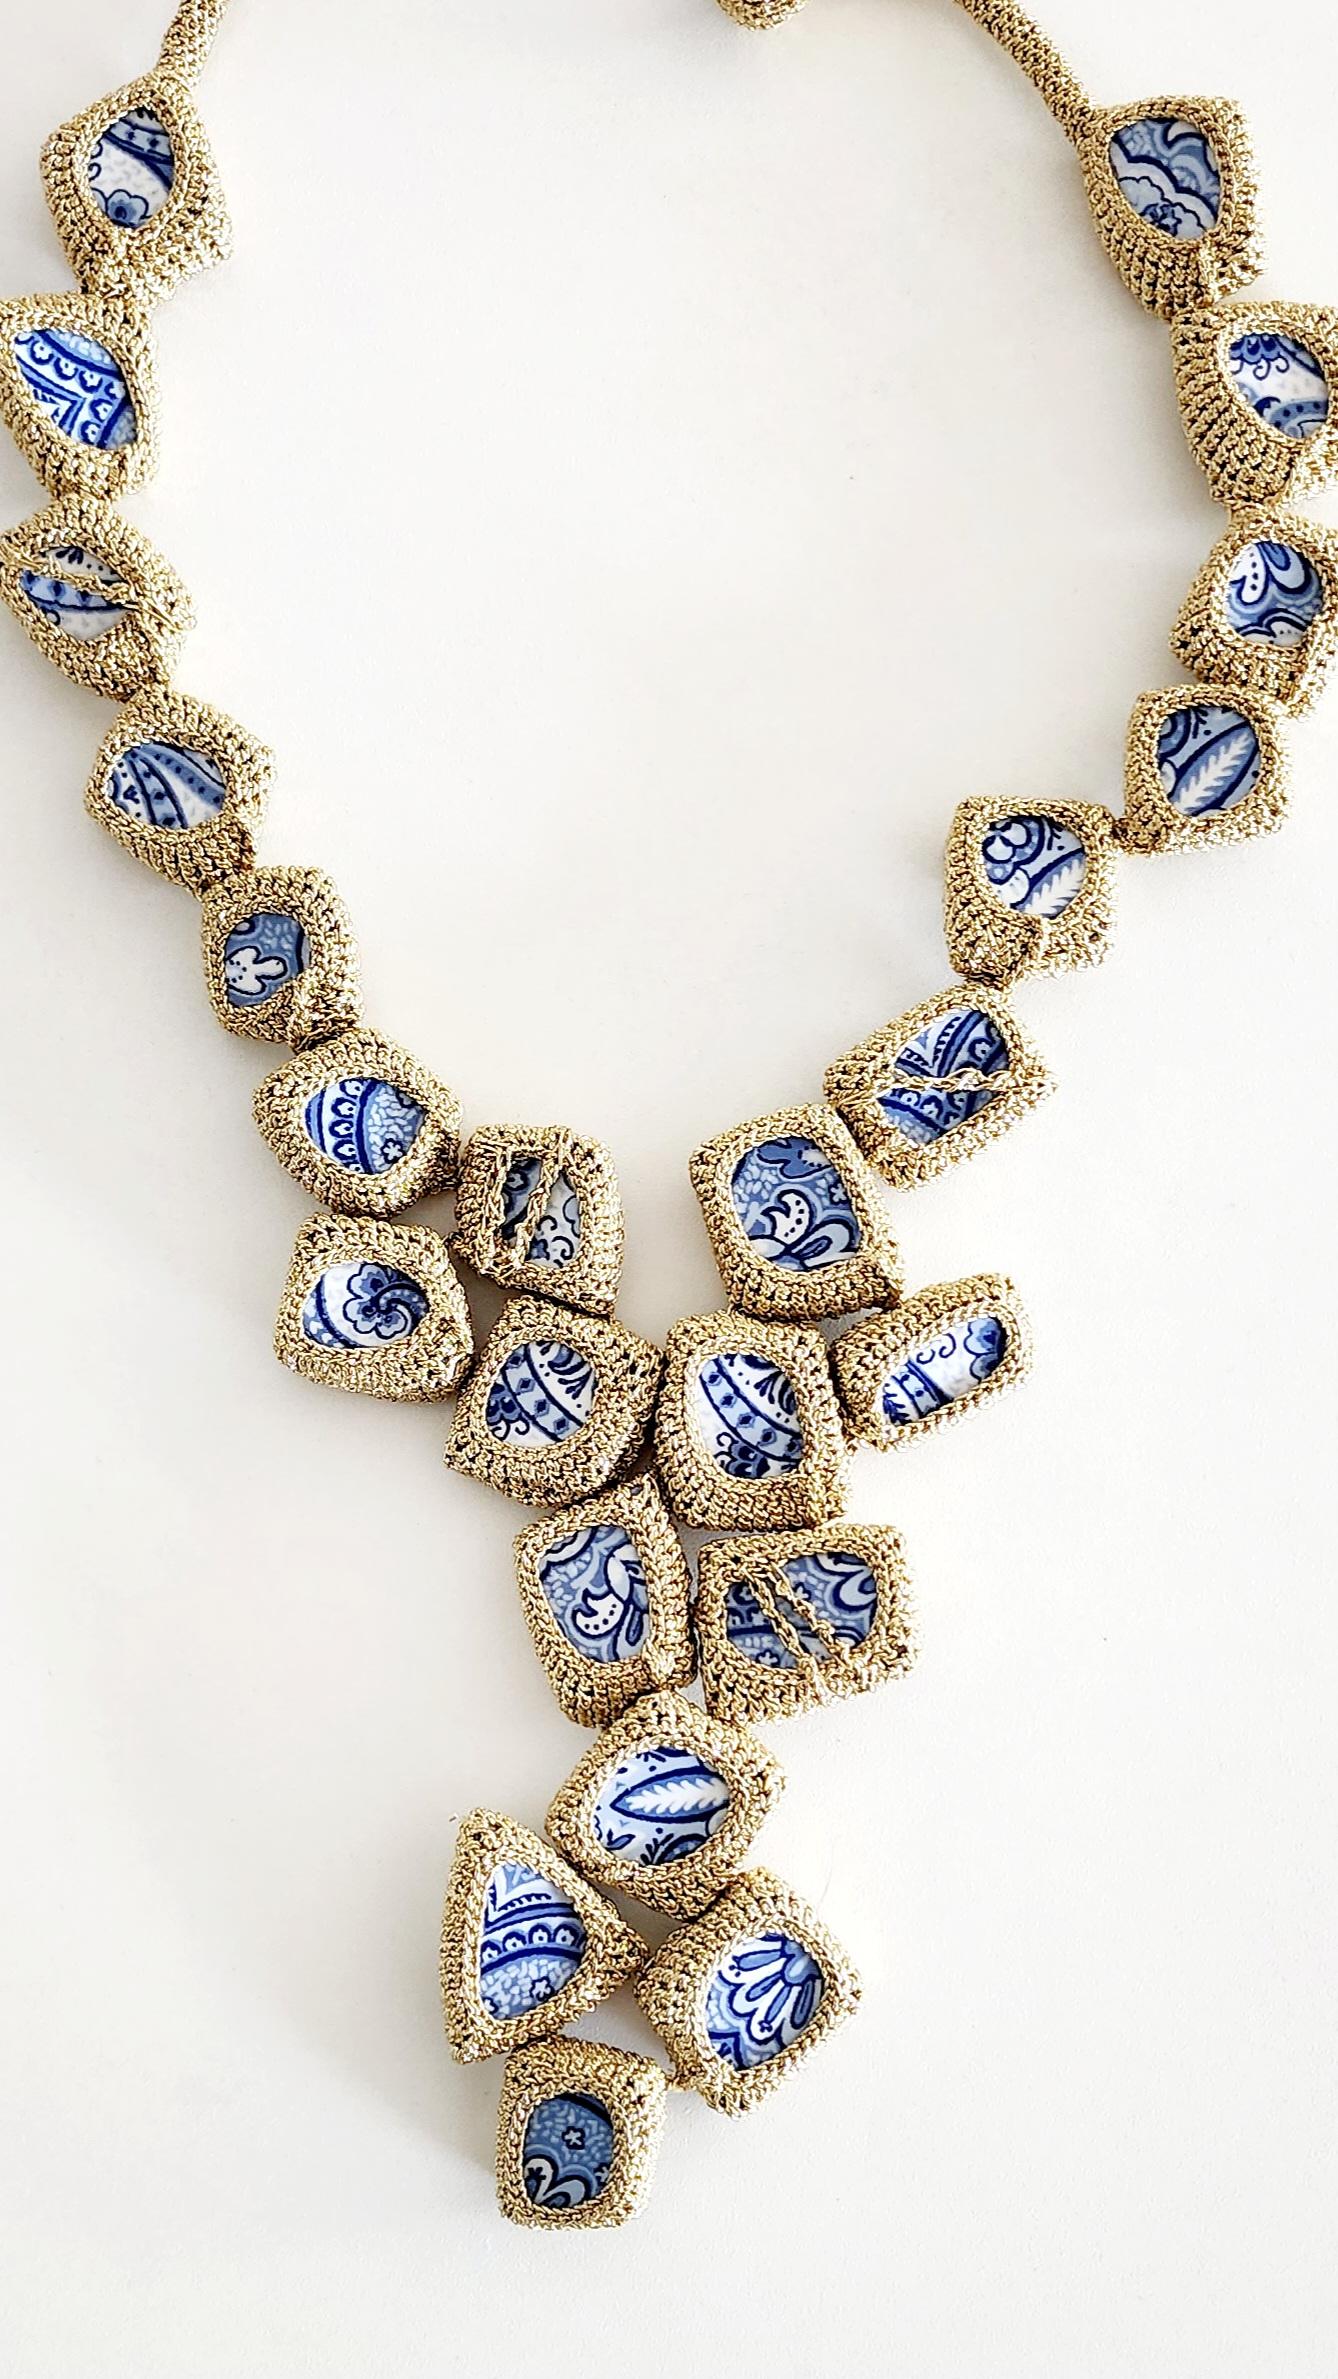 Blue and White cut Ceramics Hand Crochet Golden Thread Necklace In New Condition For Sale In Kfar Sava, IL